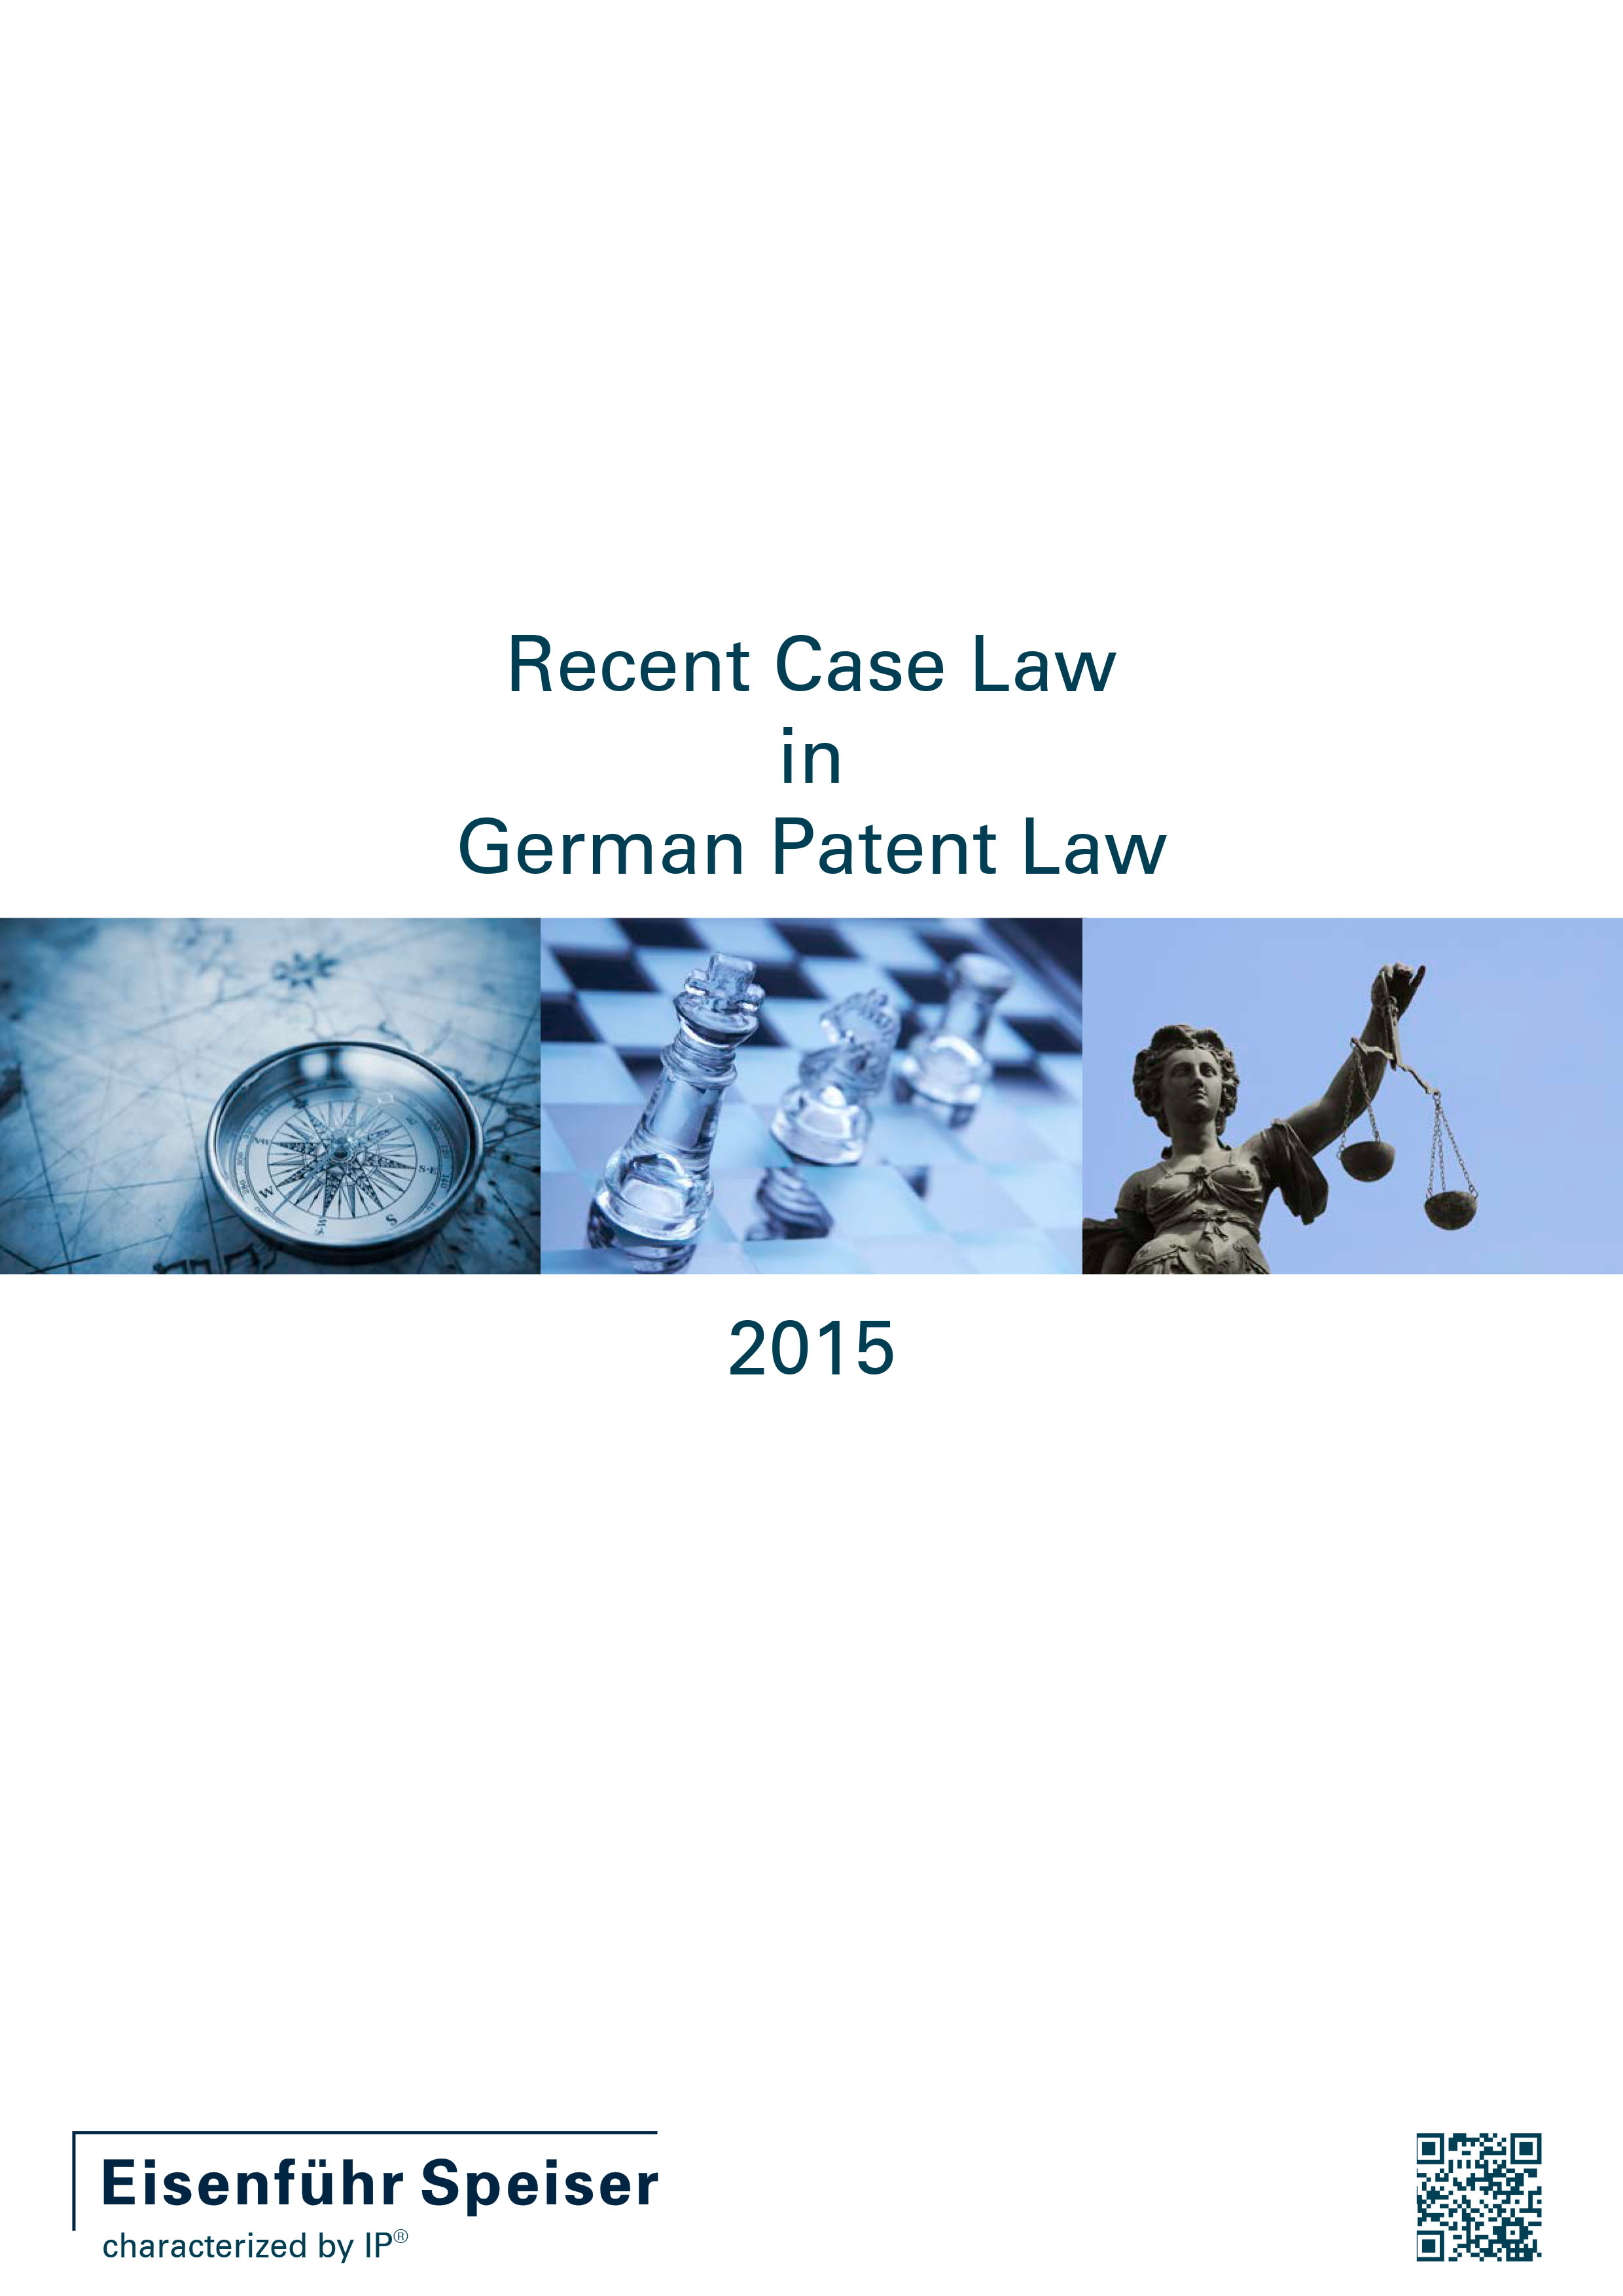 Recent Case Law in German Patent Law 2015